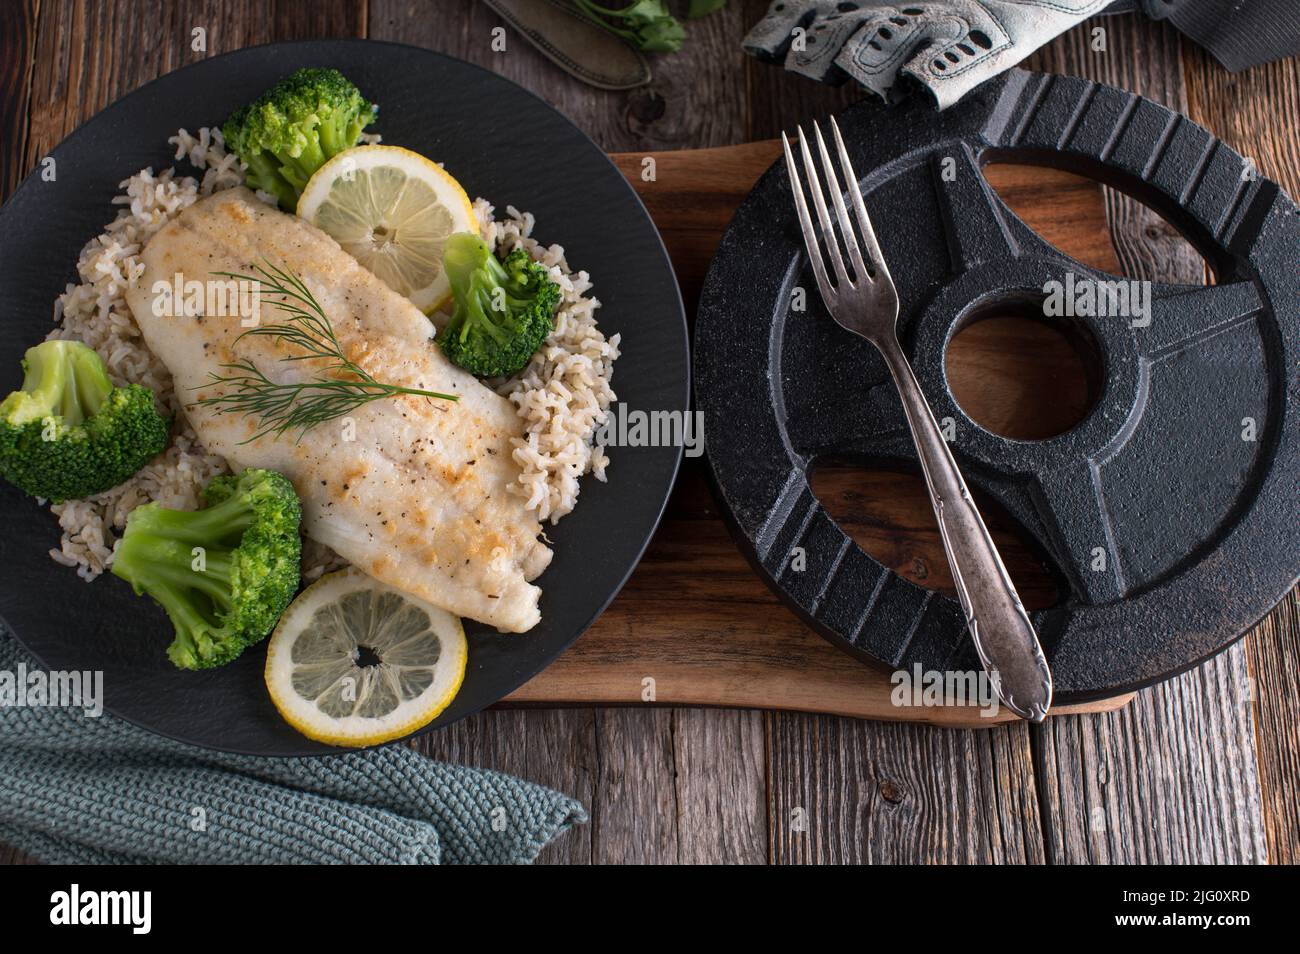 Fitness dinner with fish, brown rice and broccoli on a plate Stock Photo